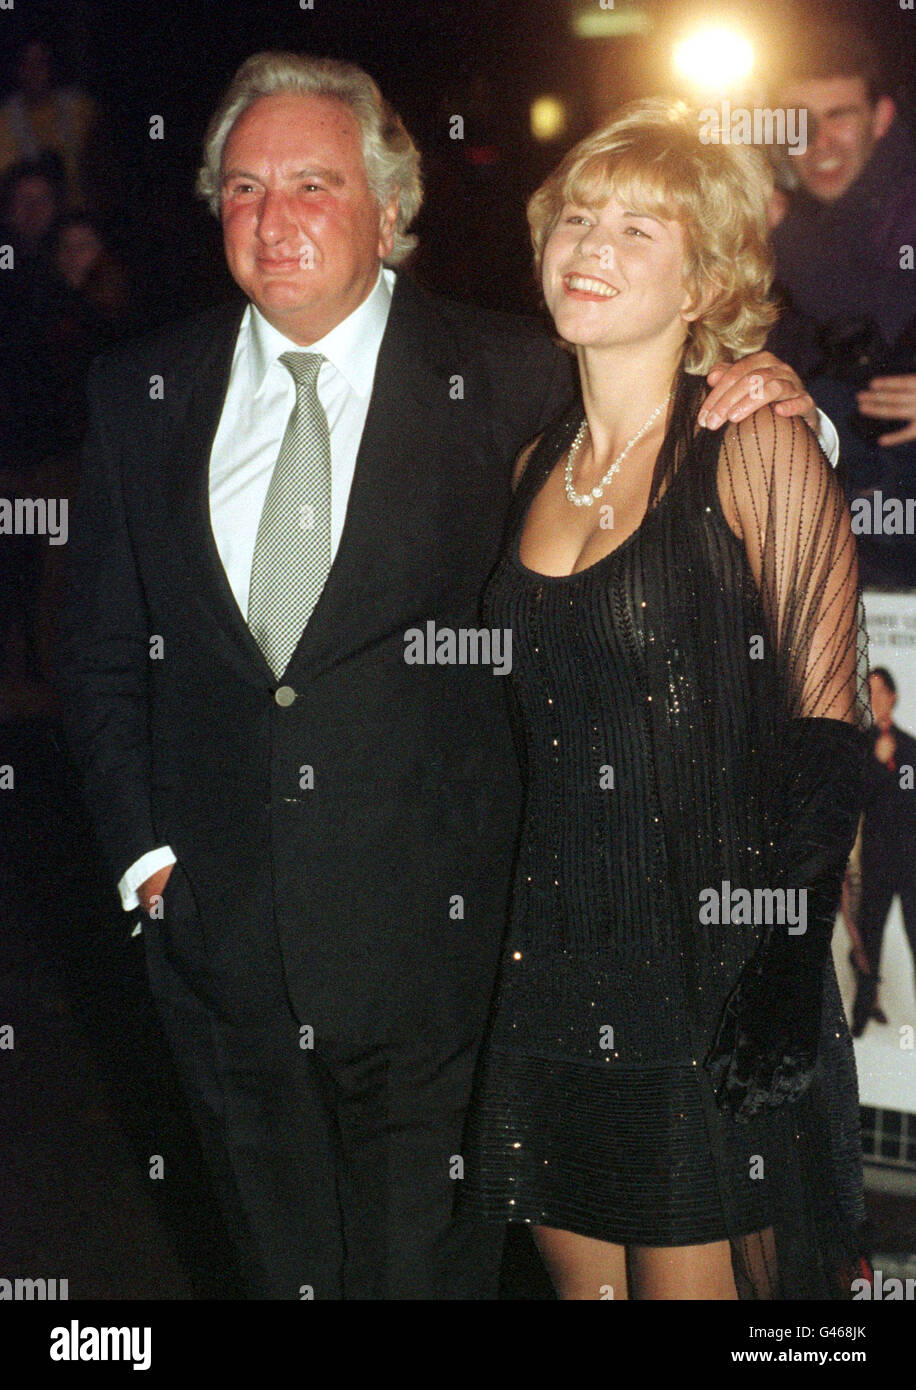 FILM DIRECTOR MICHAEL WINNER AND GIRLFRIEND VANESSA PERRY ARRIVES AT THE EMPIRE LEICESTER SQUARE FOR THE PREMIERE OF 'FIERCE CREATURES'. Stock Photo